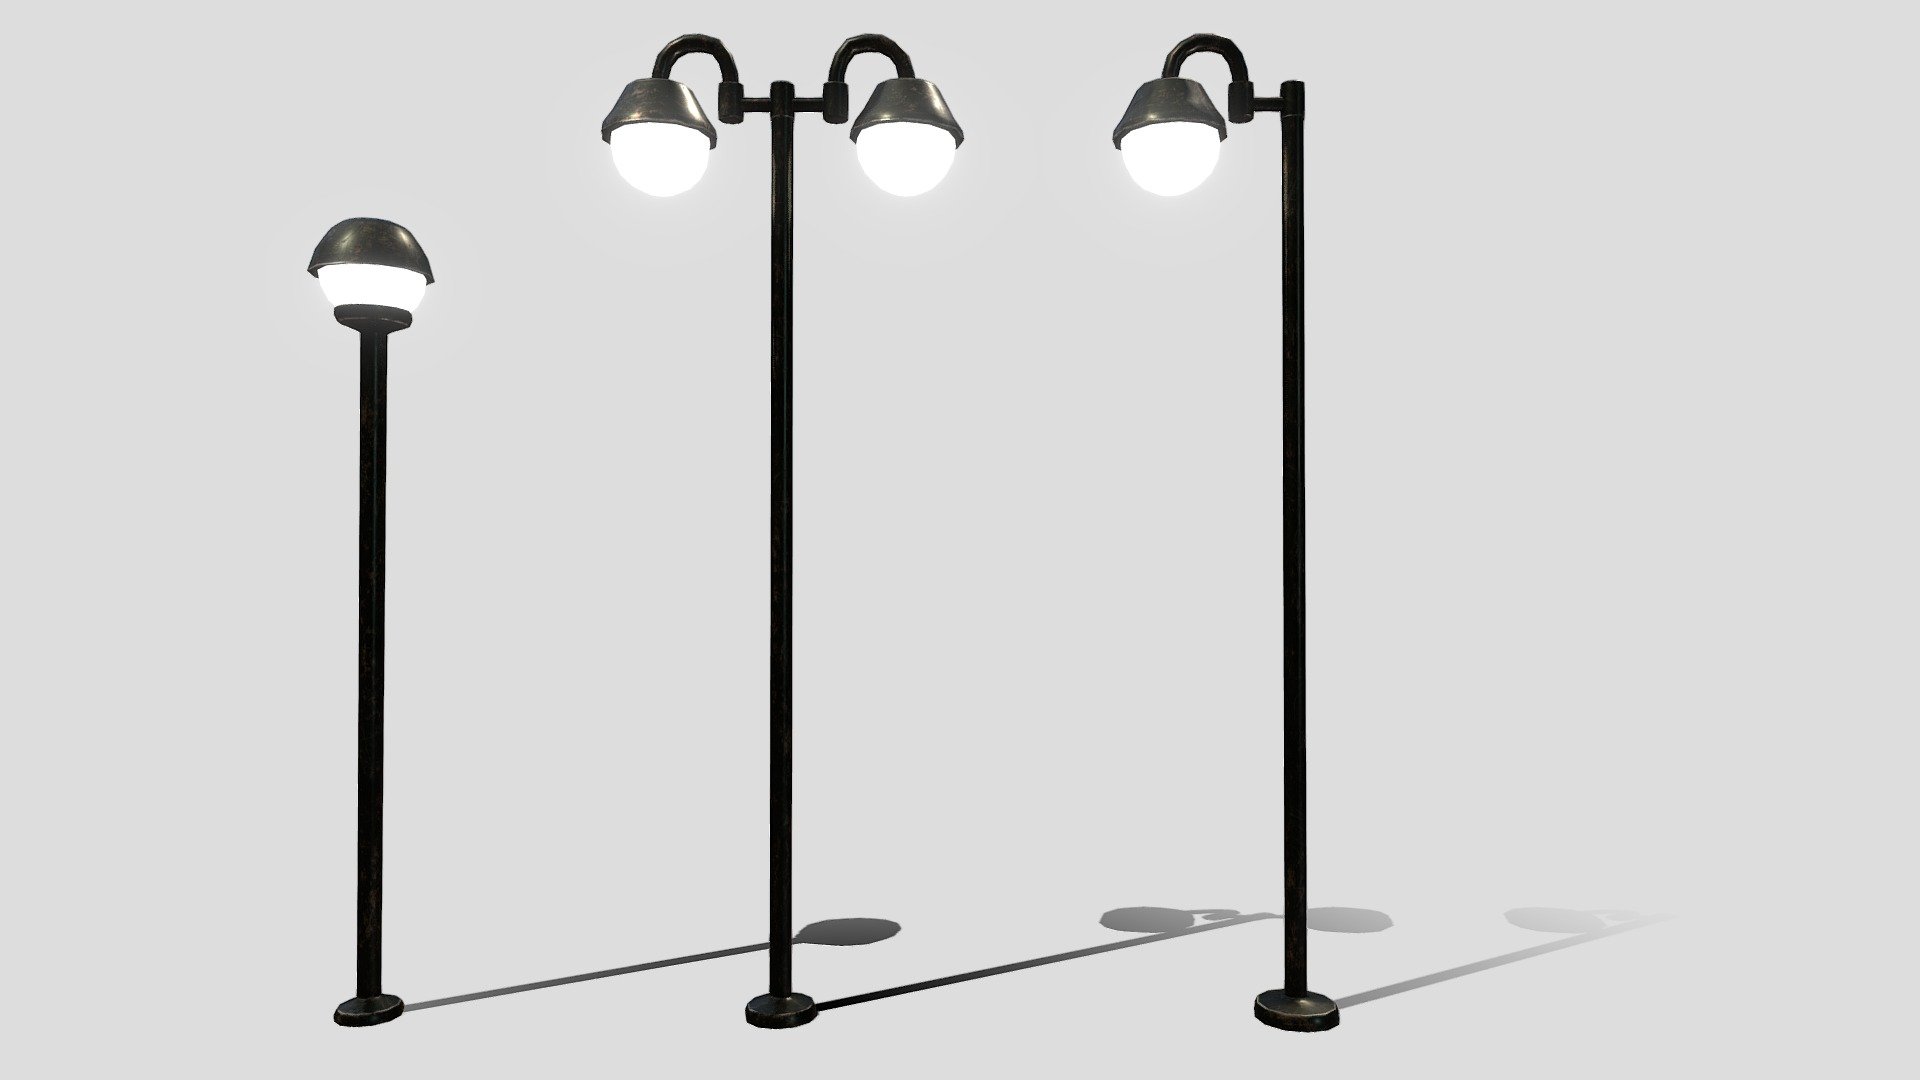 A pack with 3 gameready low poly decorative light poles 3d model